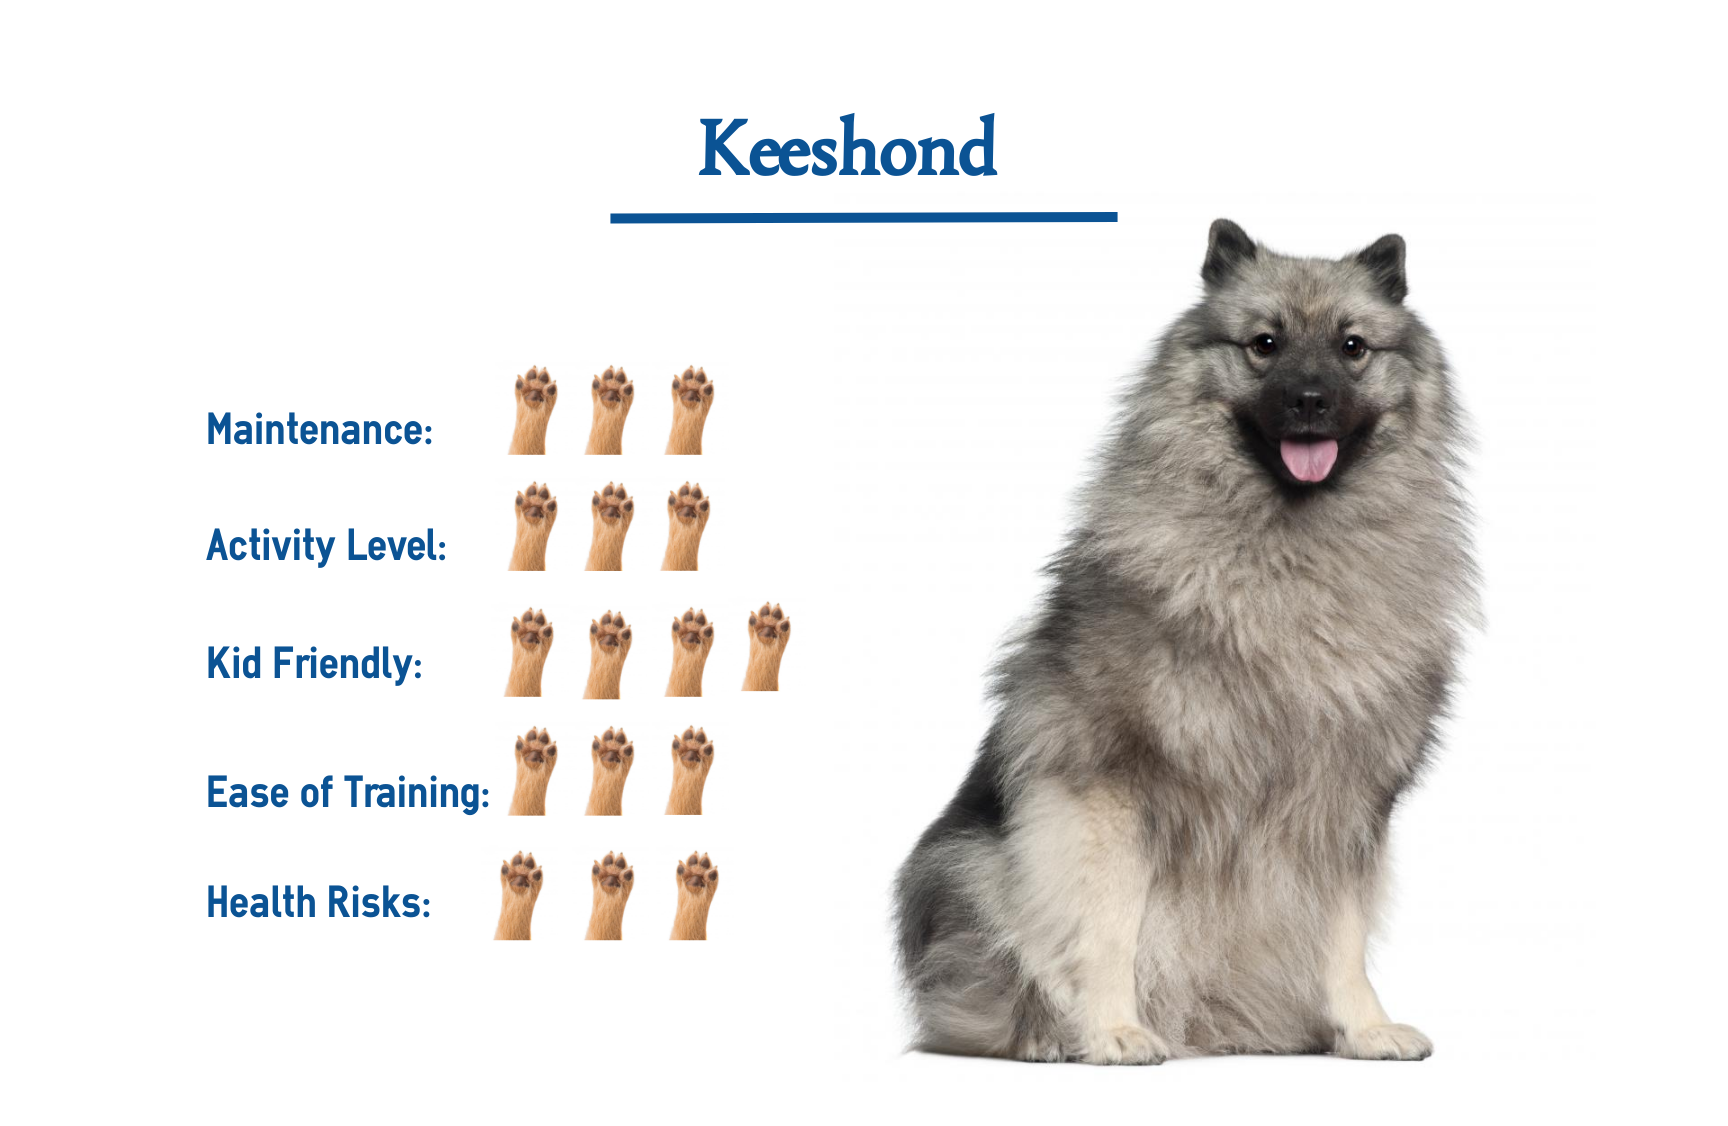 What Breeds Make Up A Keeshond